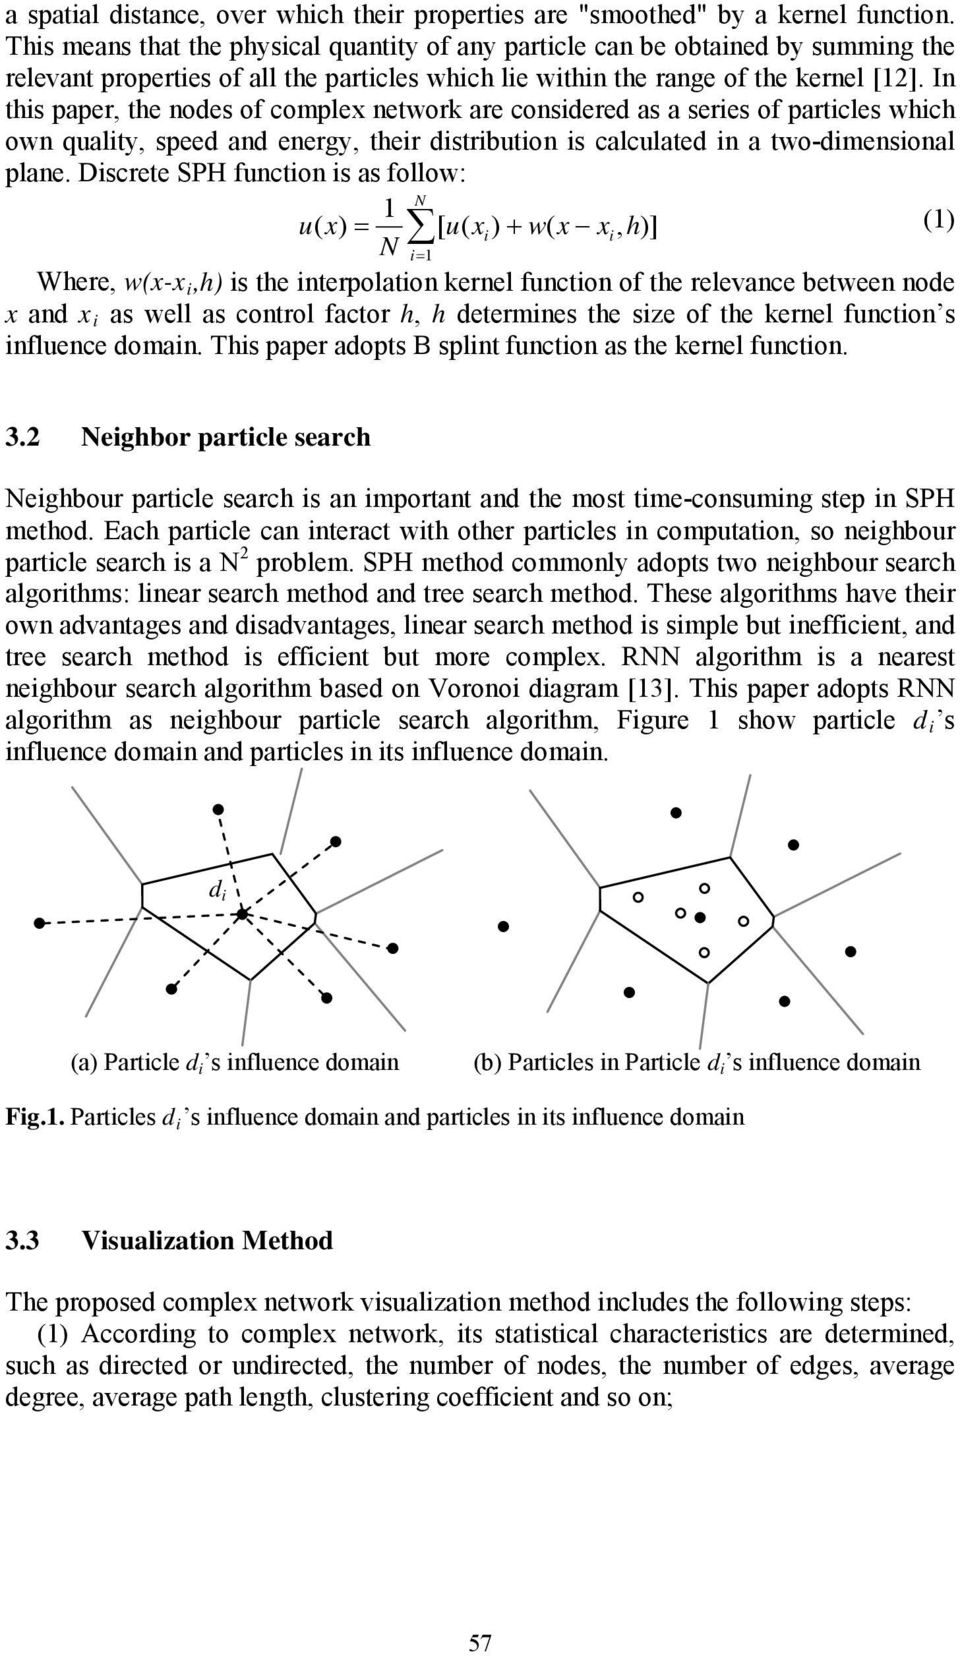 In this paper, the nodes of complex network are considered as a series of particles which own quality, speed and energy, their distribution is calculated in a two-dimensional plane.